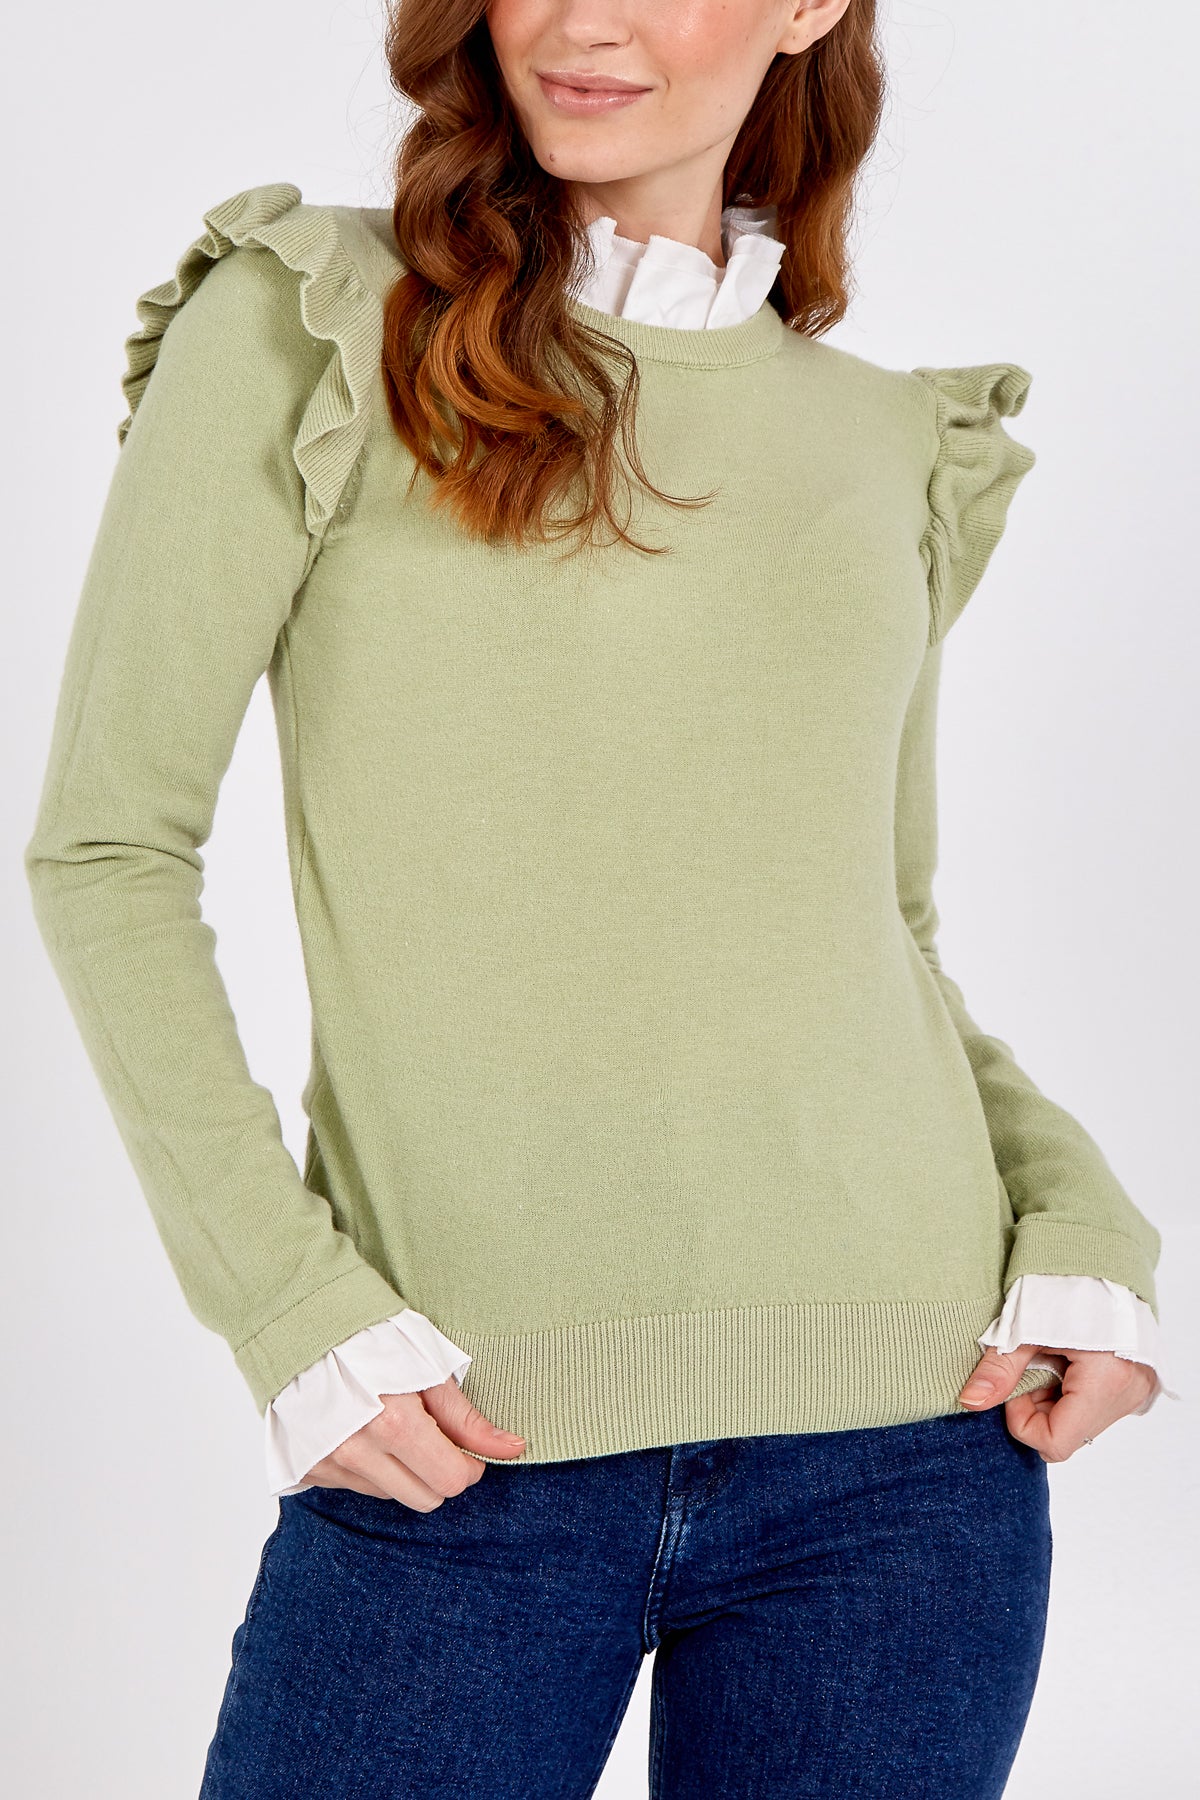 Ruffle Shoulder Jumper With Frill Neck & Cuff